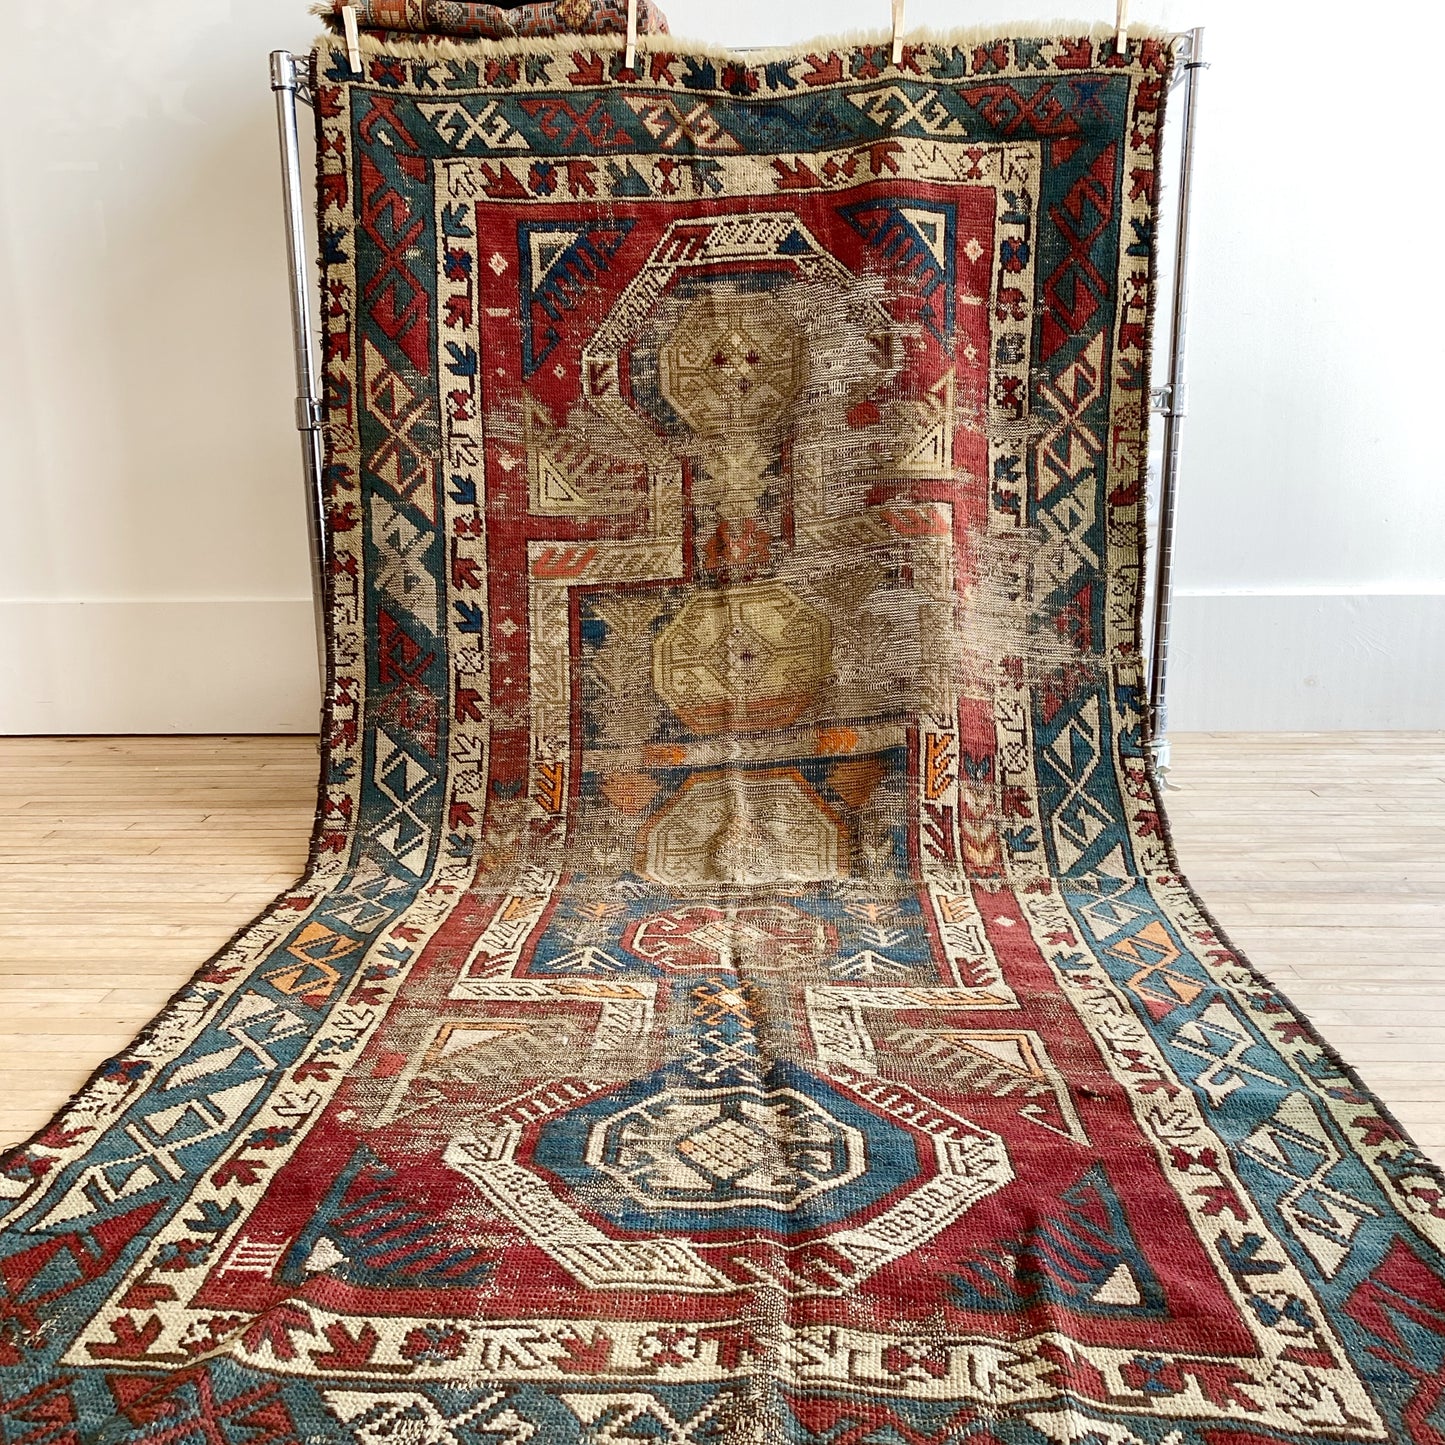 Antique Hand-knotted Persian Rug (7' 6" x 3' 7.75")